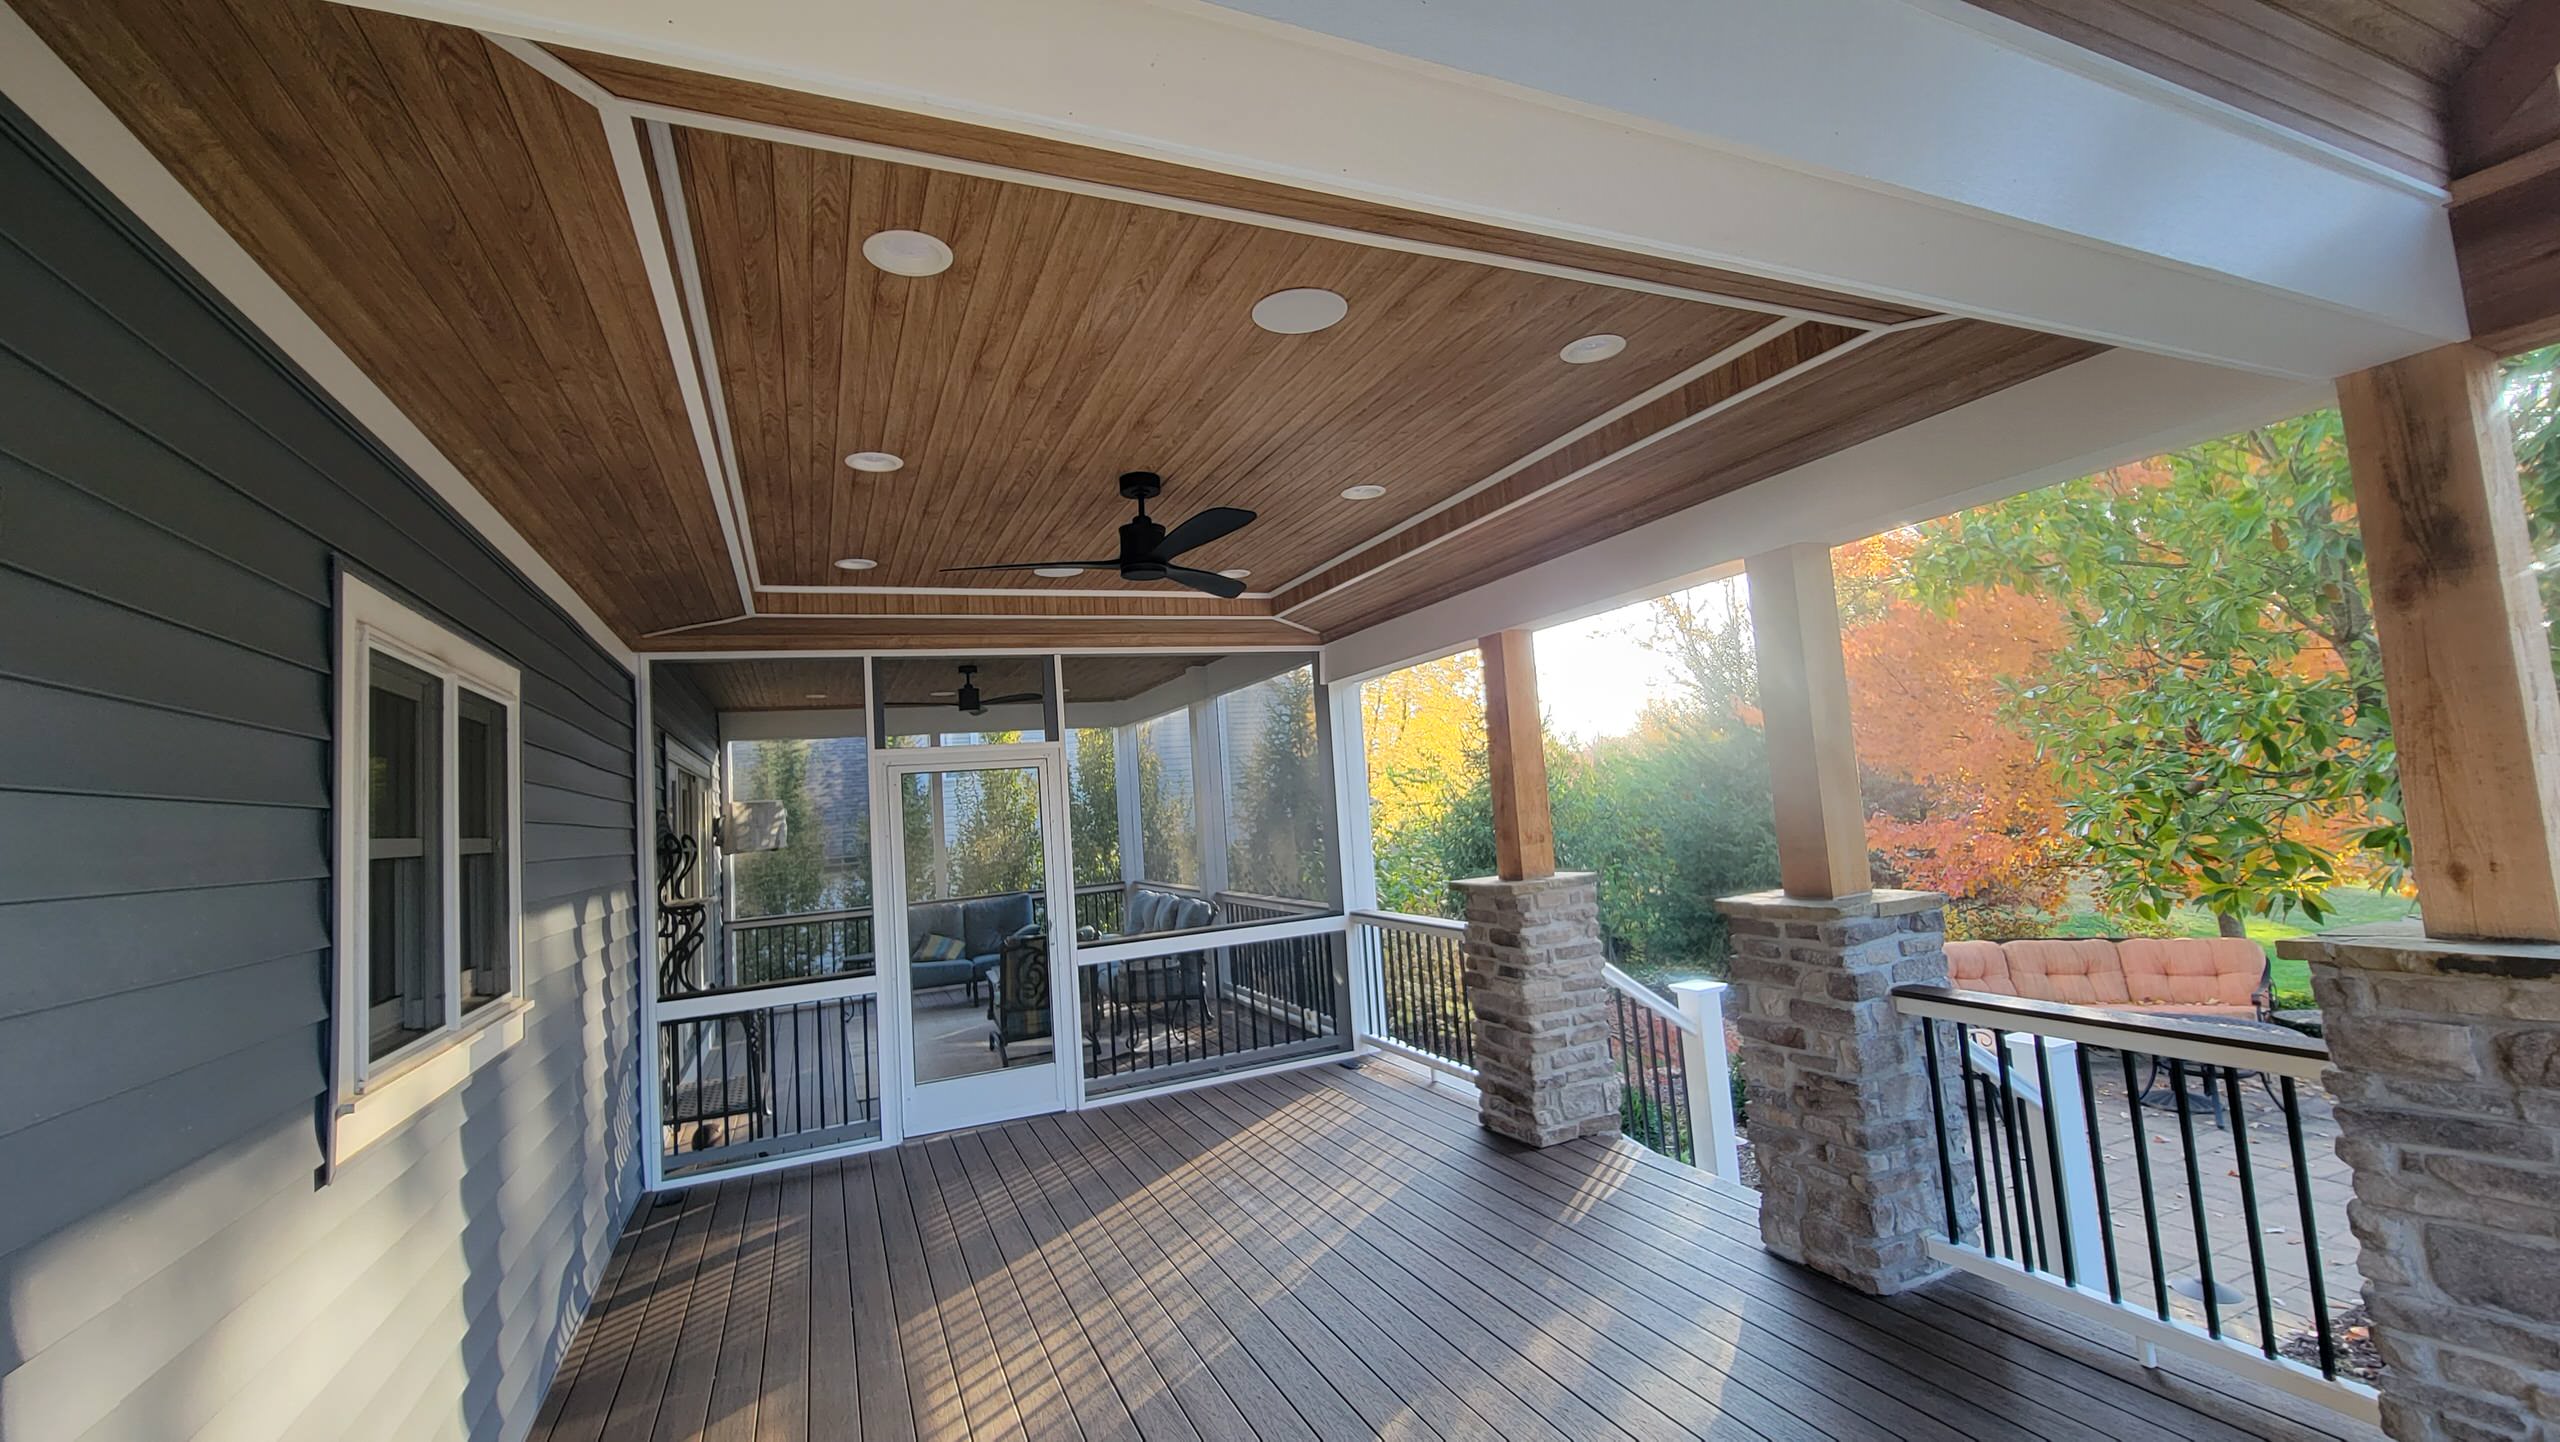 New Deck and Screened-In-Porch